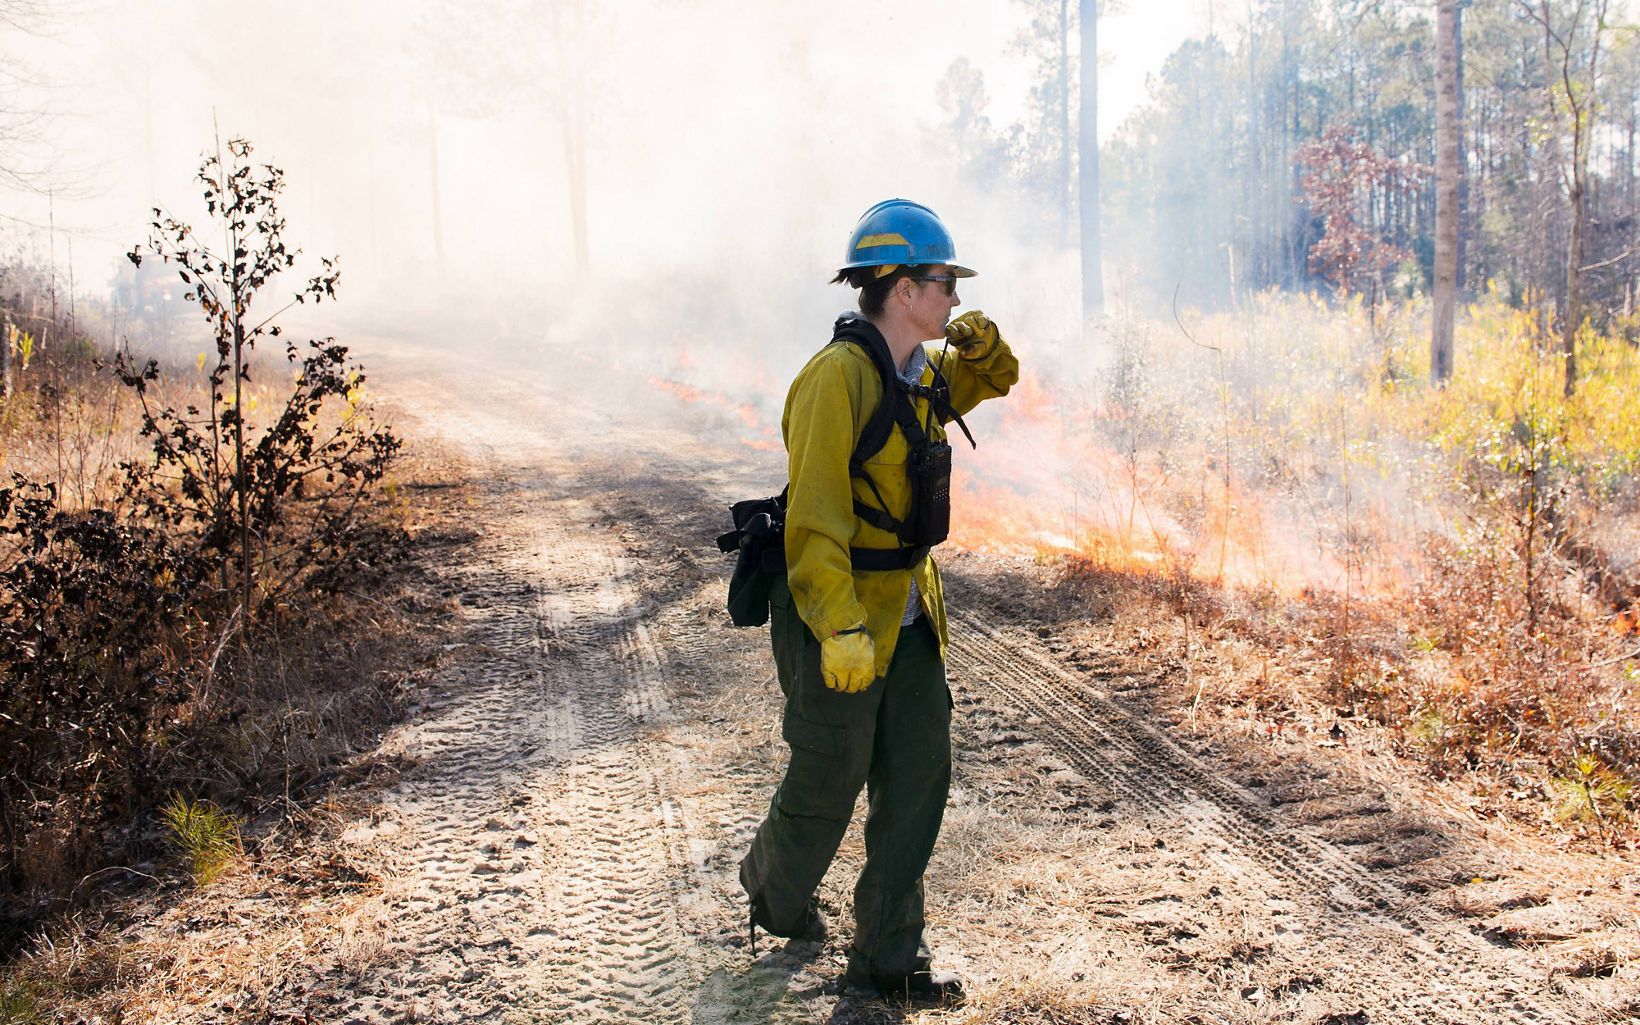 Crew members constantly communicate with each other during a controlled burn via radio.